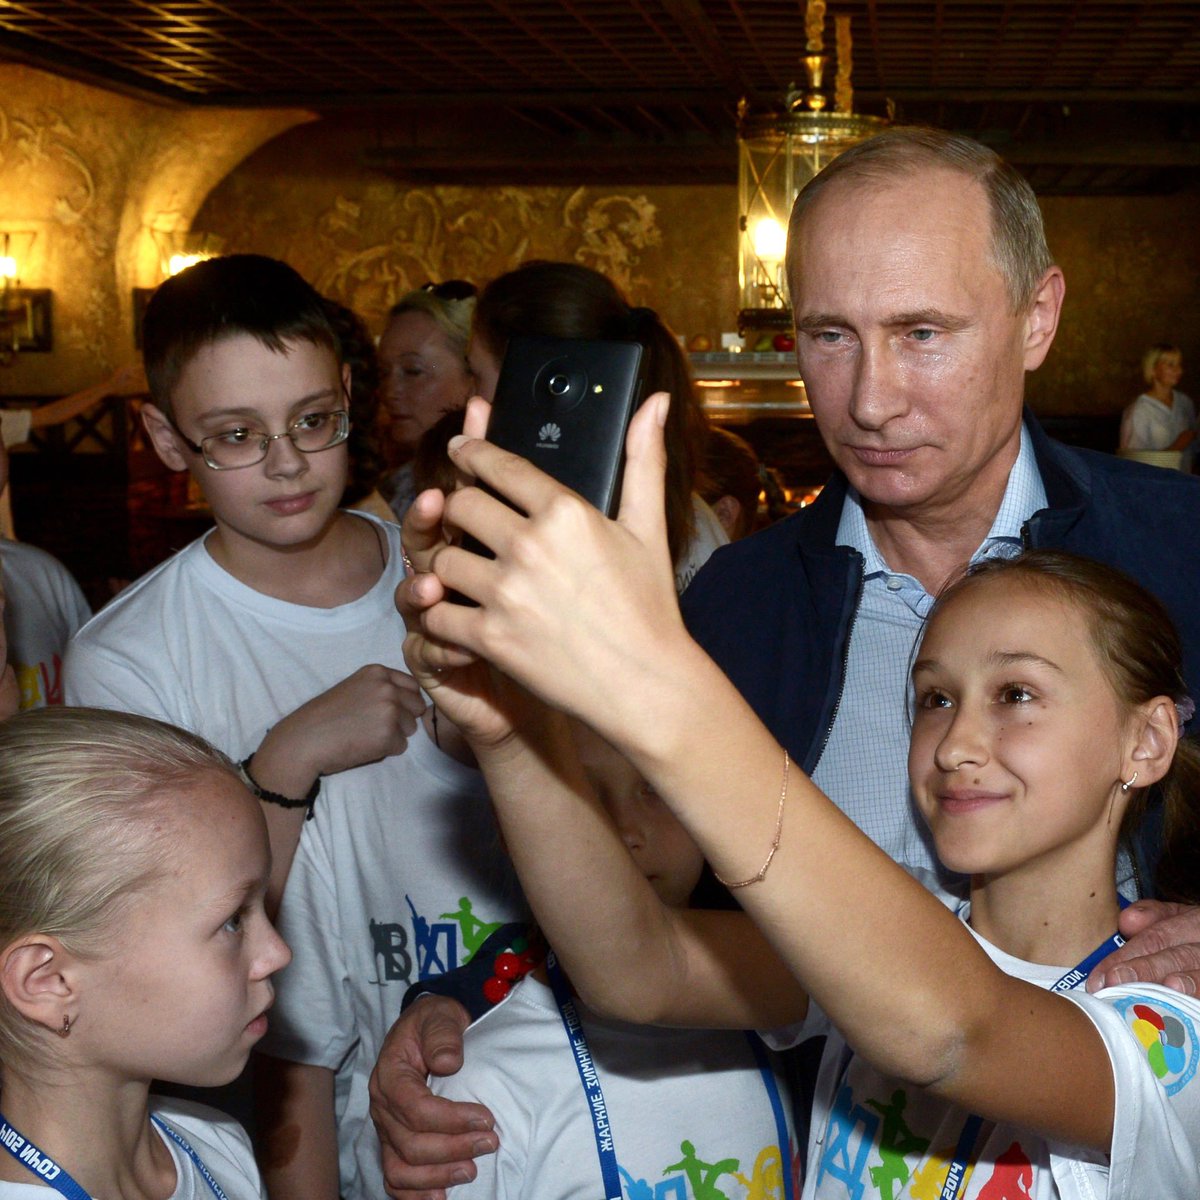 🇷🇺 Russia celebrates International Day for the Protection of Children on June 1st. 🏳️‍🌈 The US celebrates “Pride Month' on June 1st. America is run by pedophiles.